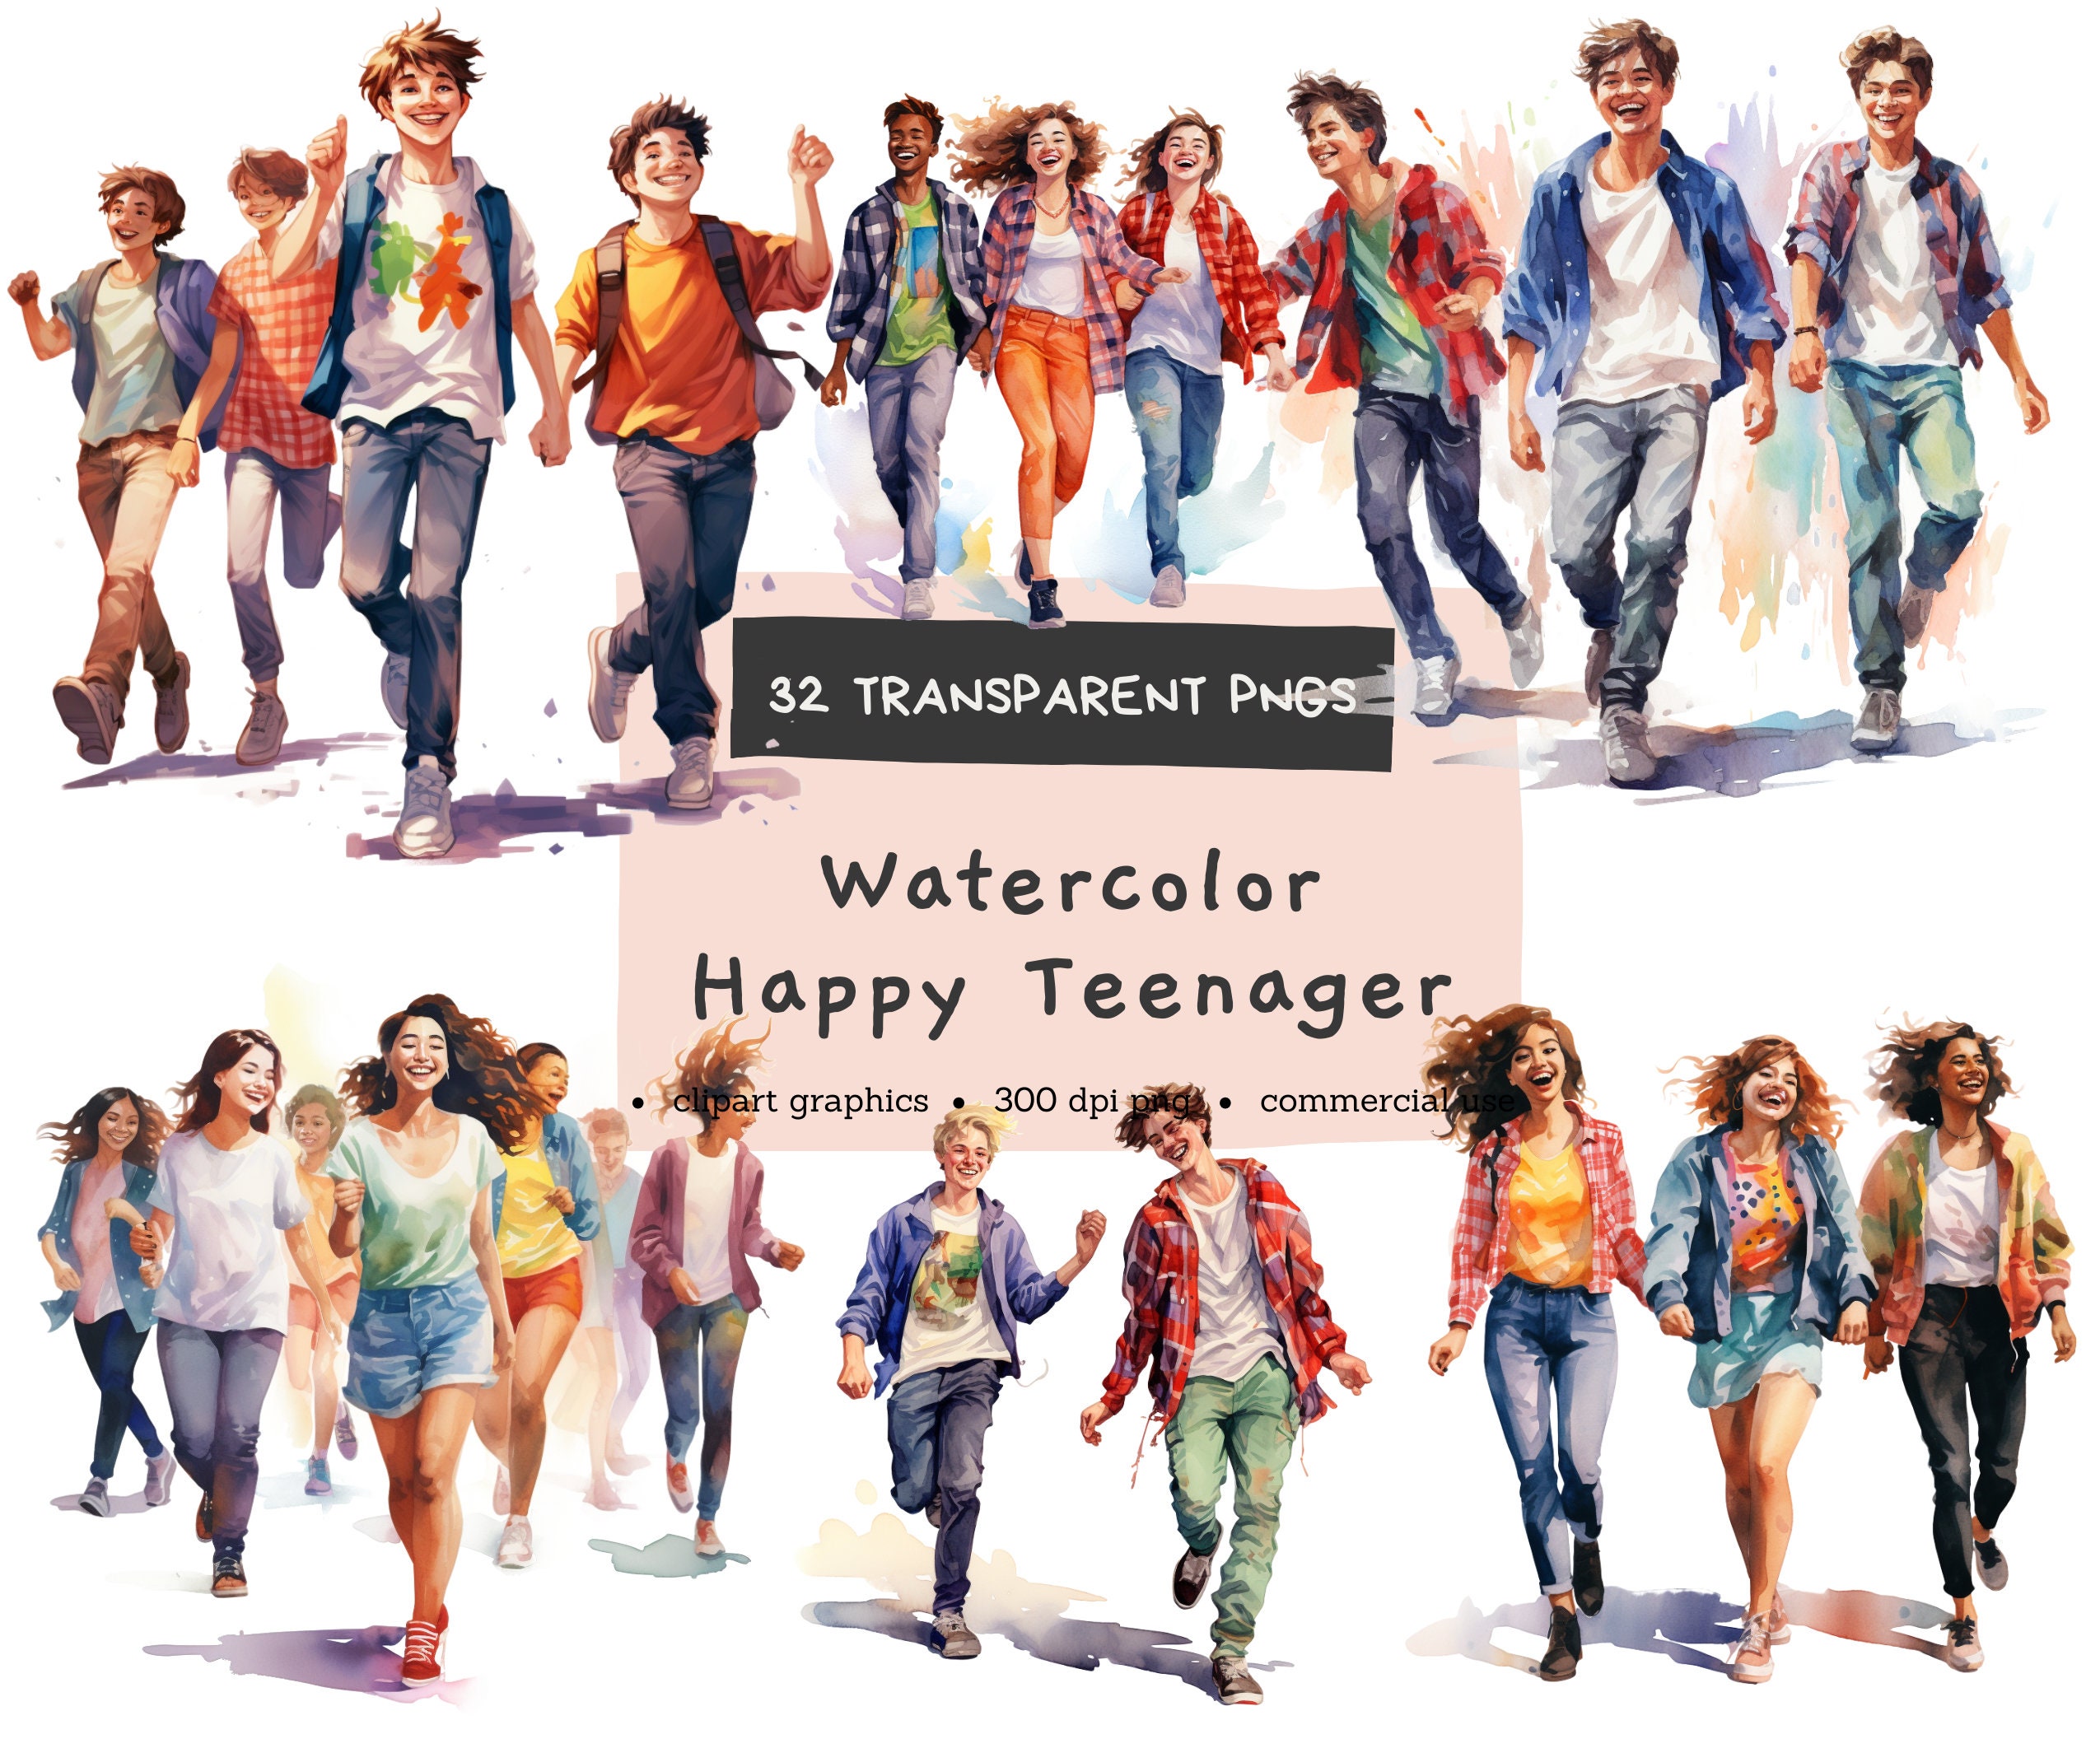 Teens and Teenagers Clip Art Set 1 - girls by Literature Daydreams